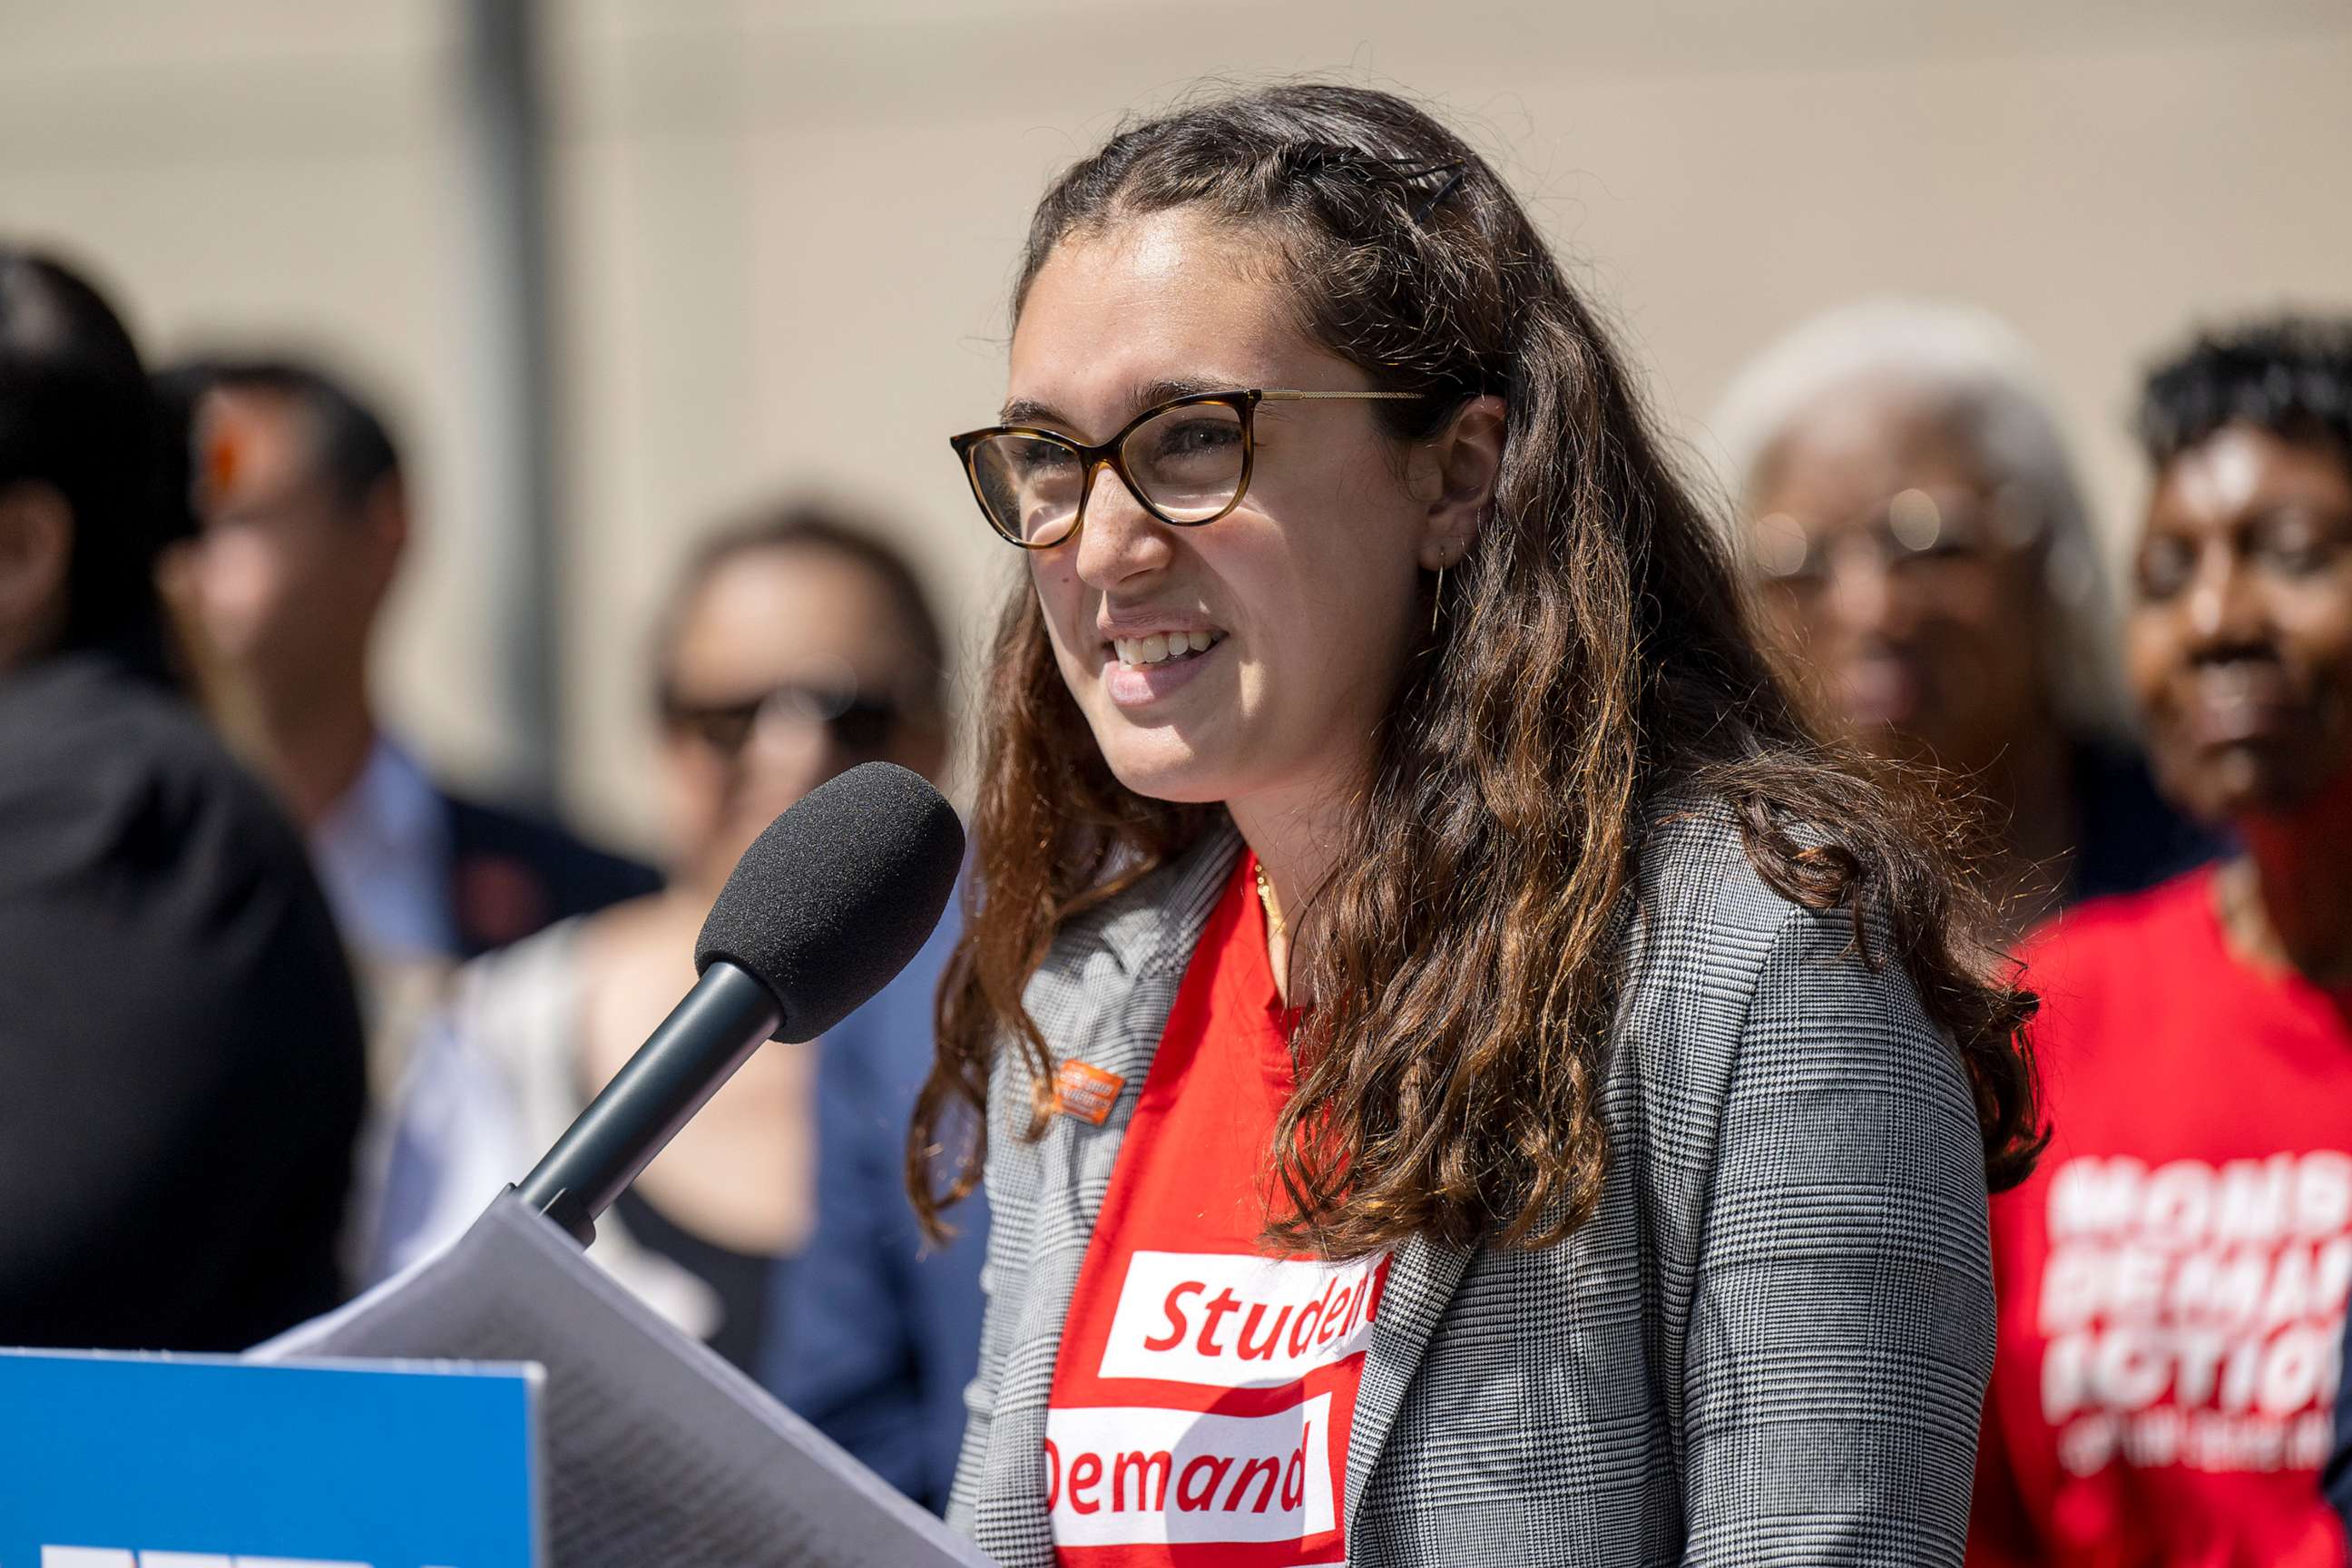 PHOTO: Mia Tretta, one of the students wounded in the 2019 shooting at Saugus High School, speaks during a news conference on gun legislation, July 22, 2022 at Santa Monica College.